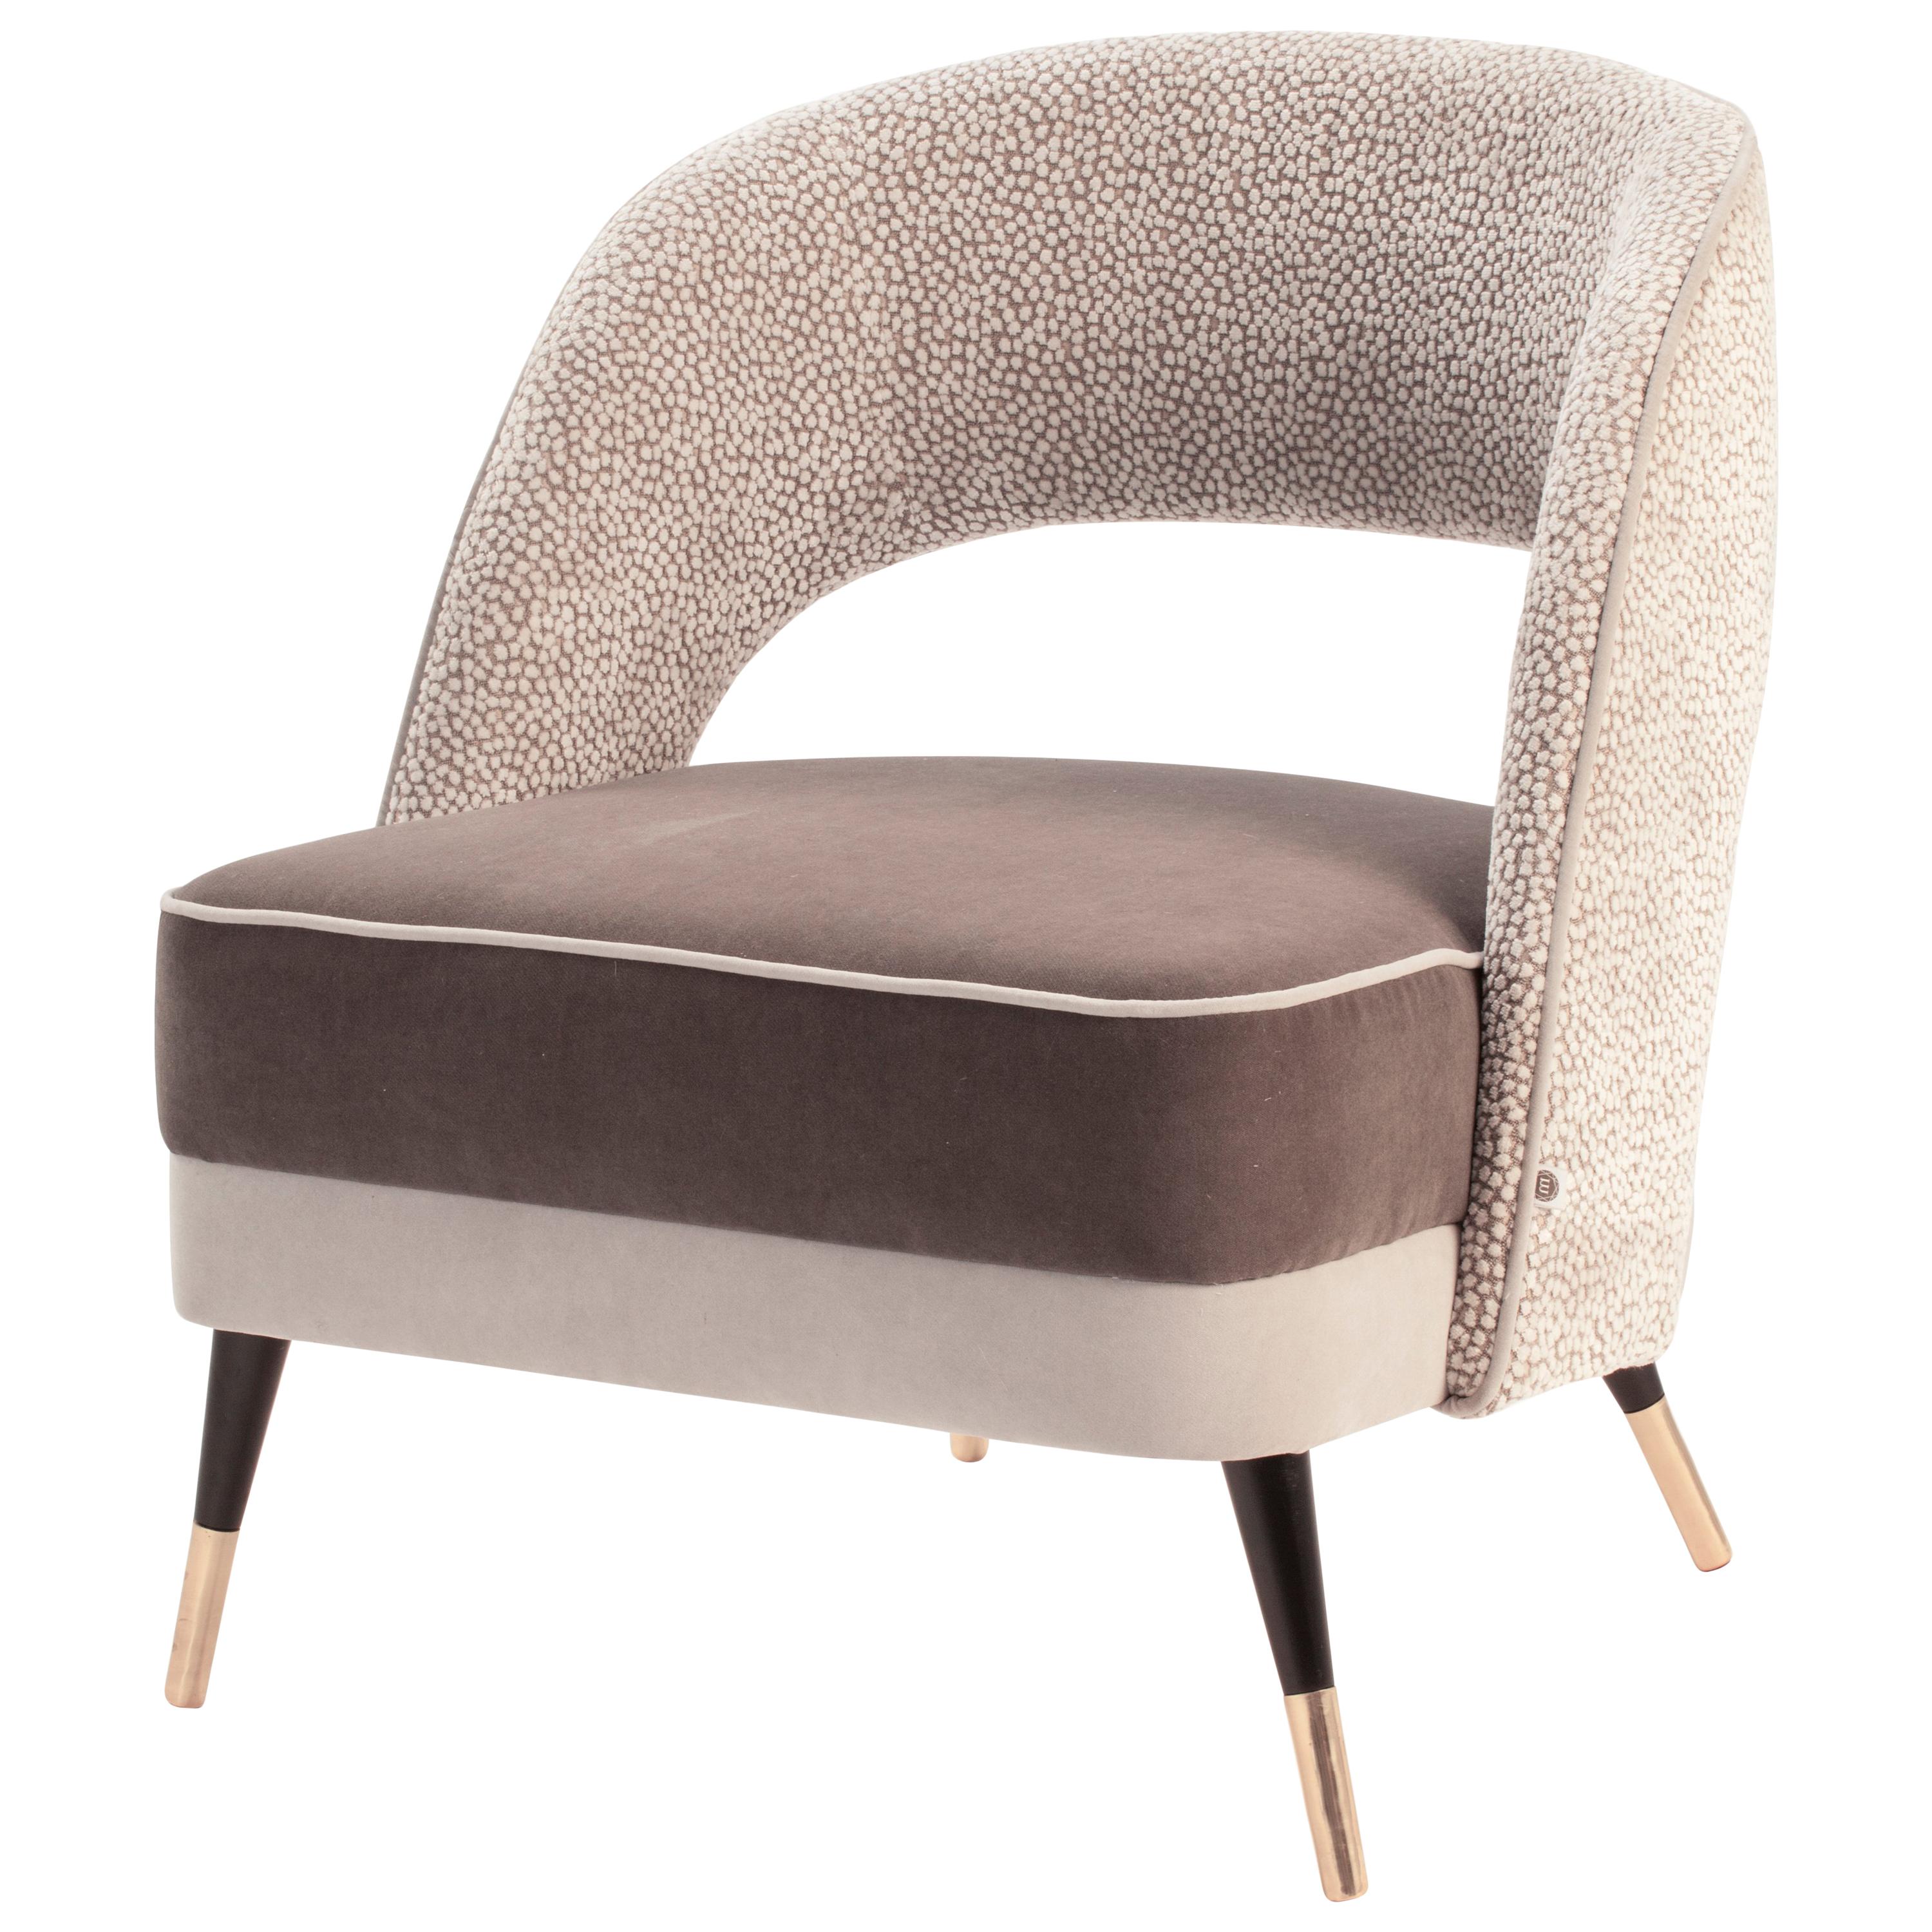 Comfortable and elegant, Ava armchair is a versatile piece where creativity meets no boundaries: fabrics, solid wood, lacquered wood and brass fittings are chosen and combined to produce the perfect combination to each space and concept. Made to